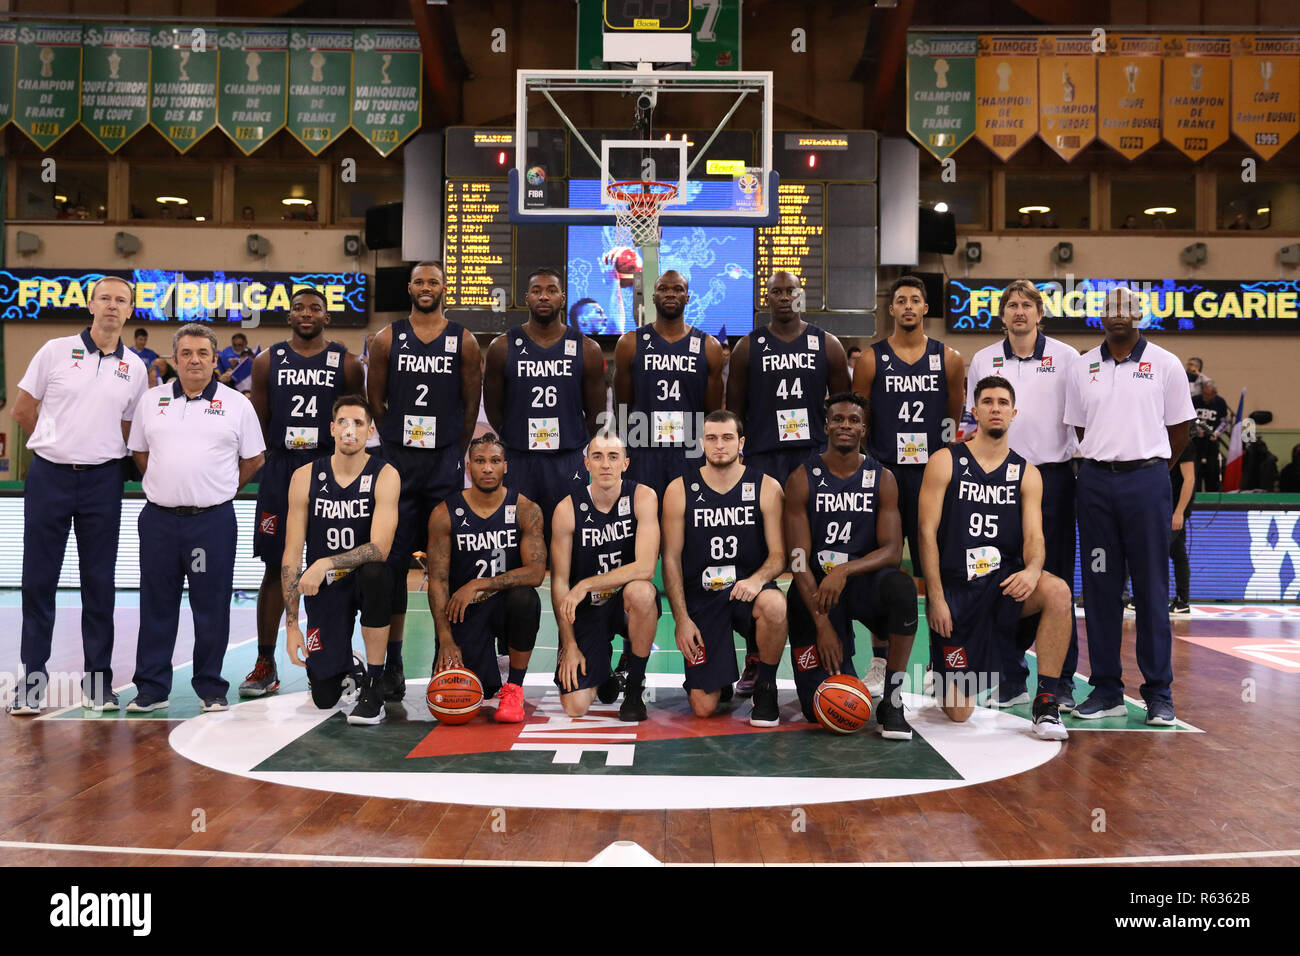 December 3, 2018 - Limoges, France - players of France pose for a team  photo prior to the FIBA World Cup China 2019, Qualifying Group K Basketball  match between France and Bulgaria